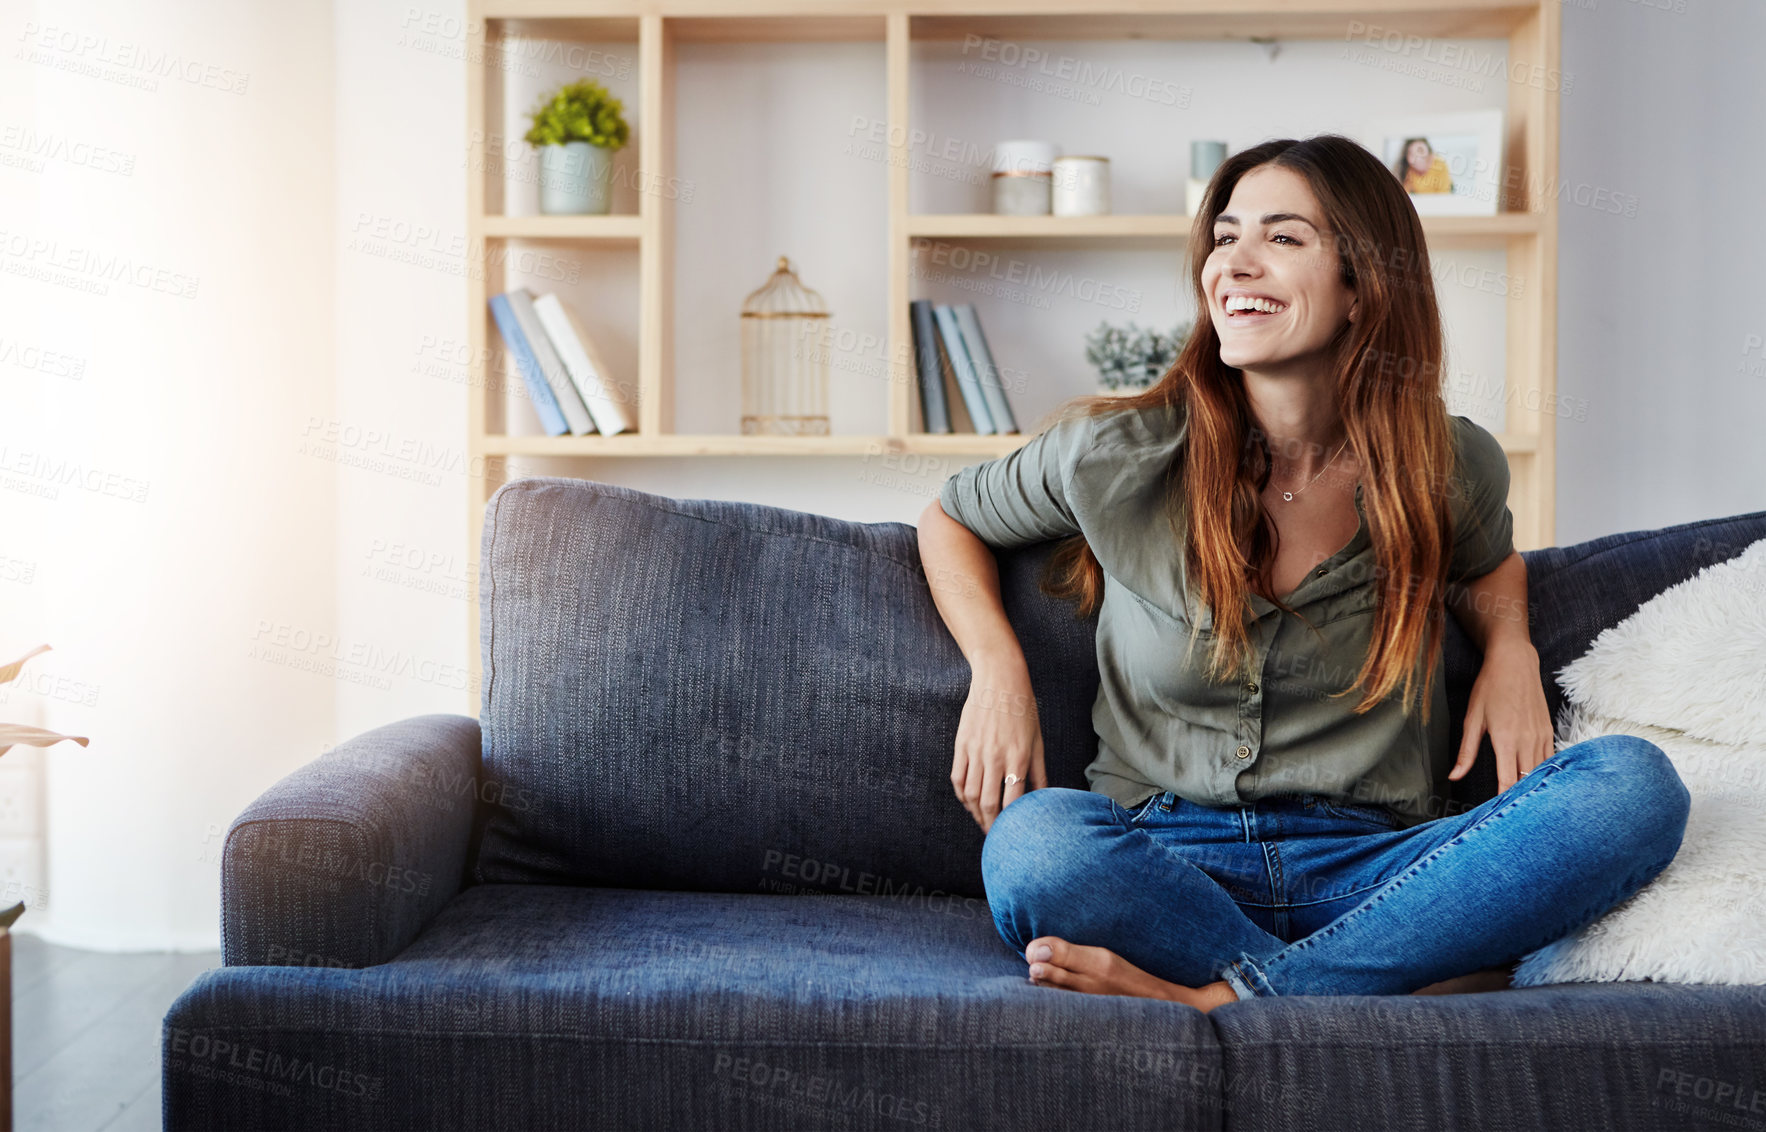 Buy stock photo Shot of a beautiful young woman relaxing in the sofa at home